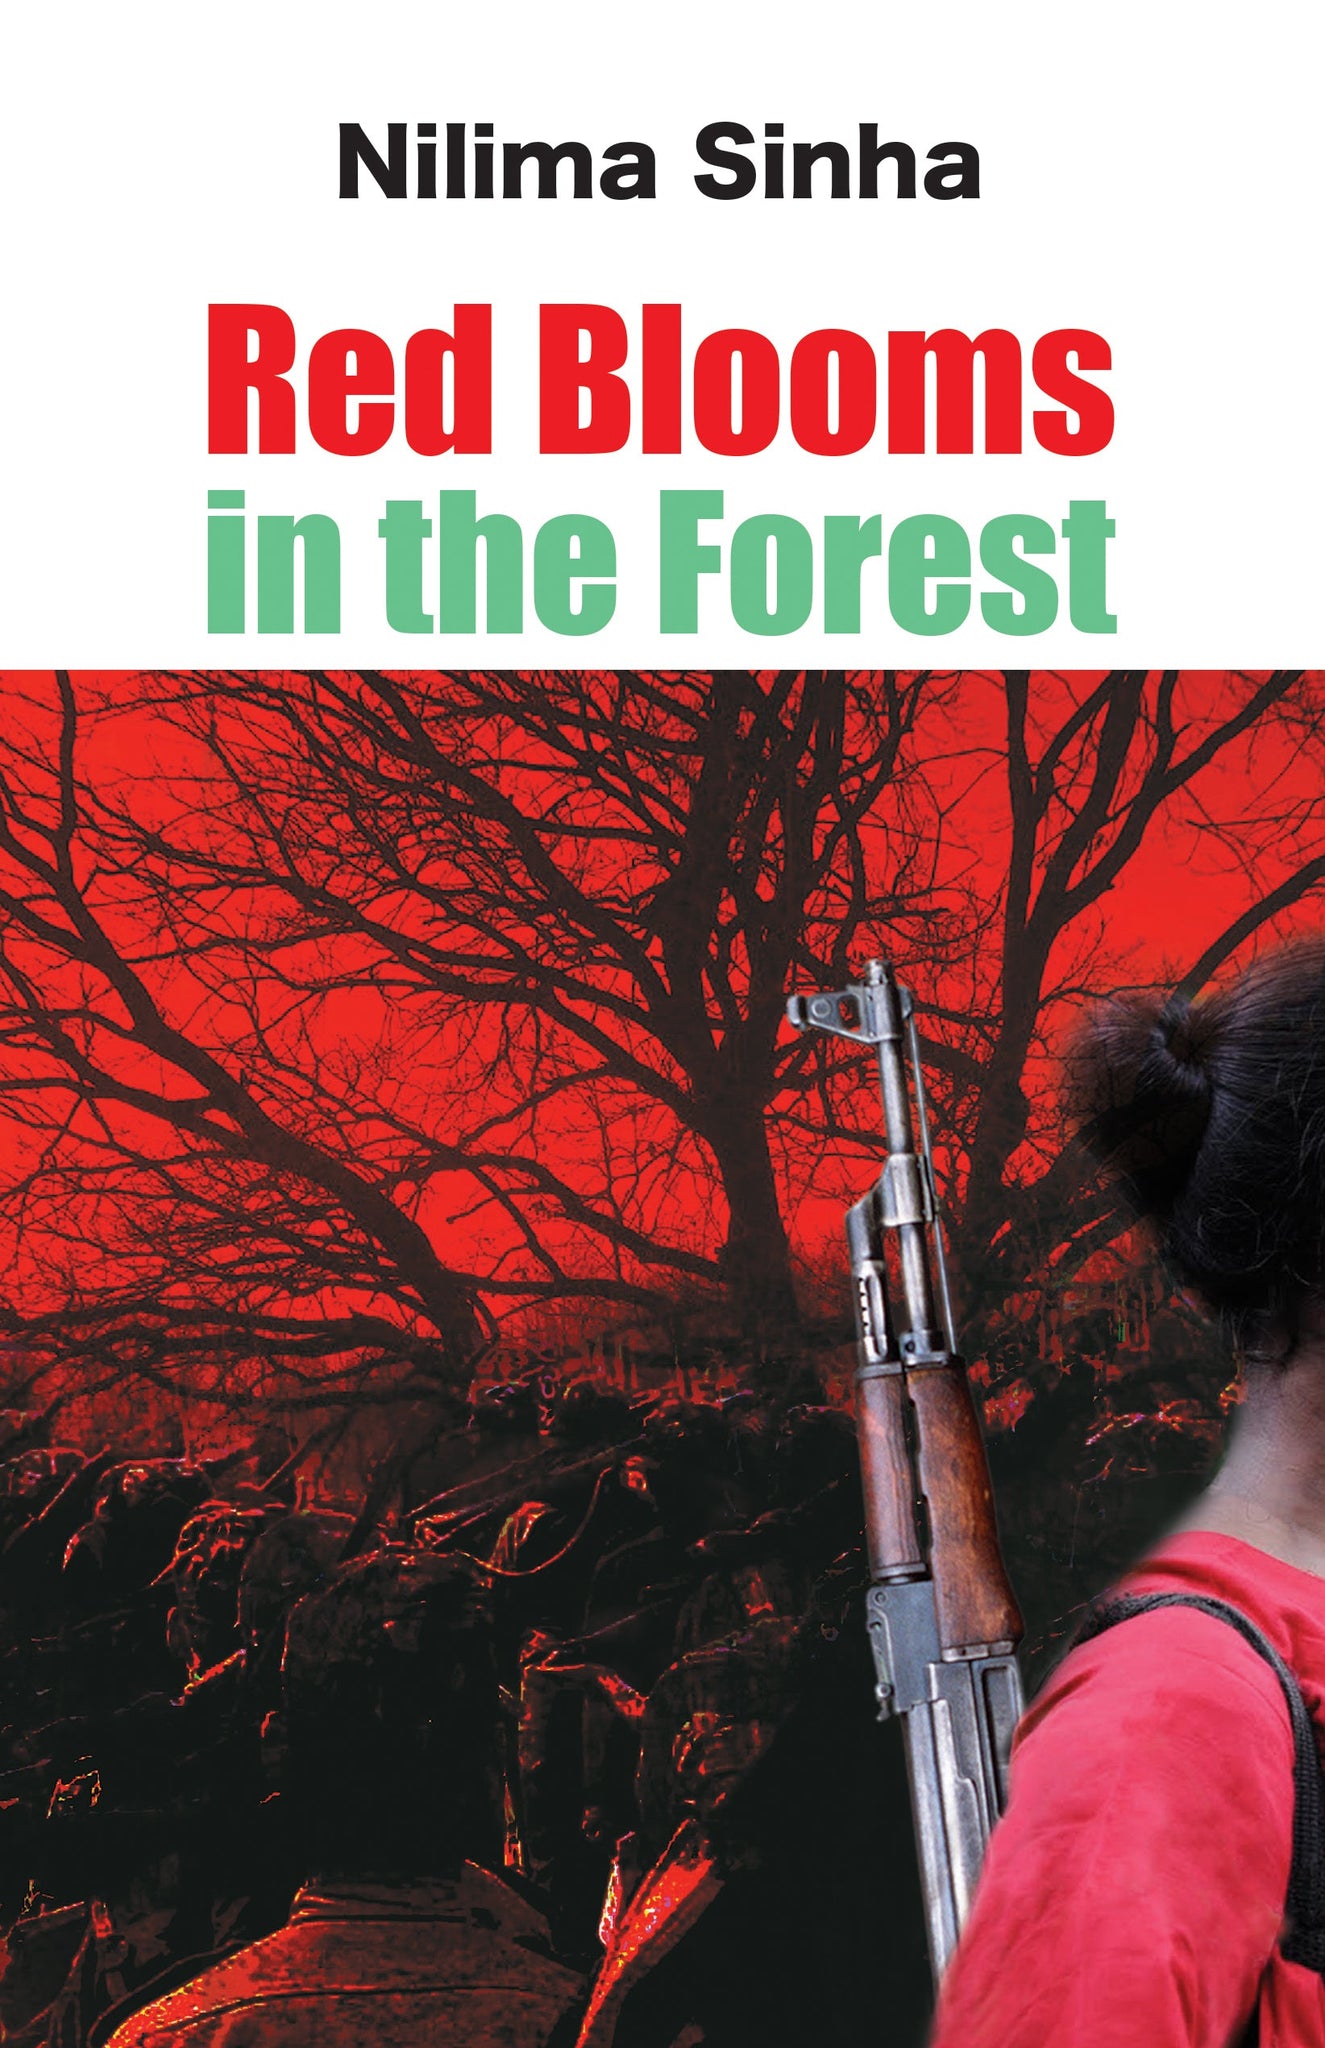 Red Blooms in the Forest